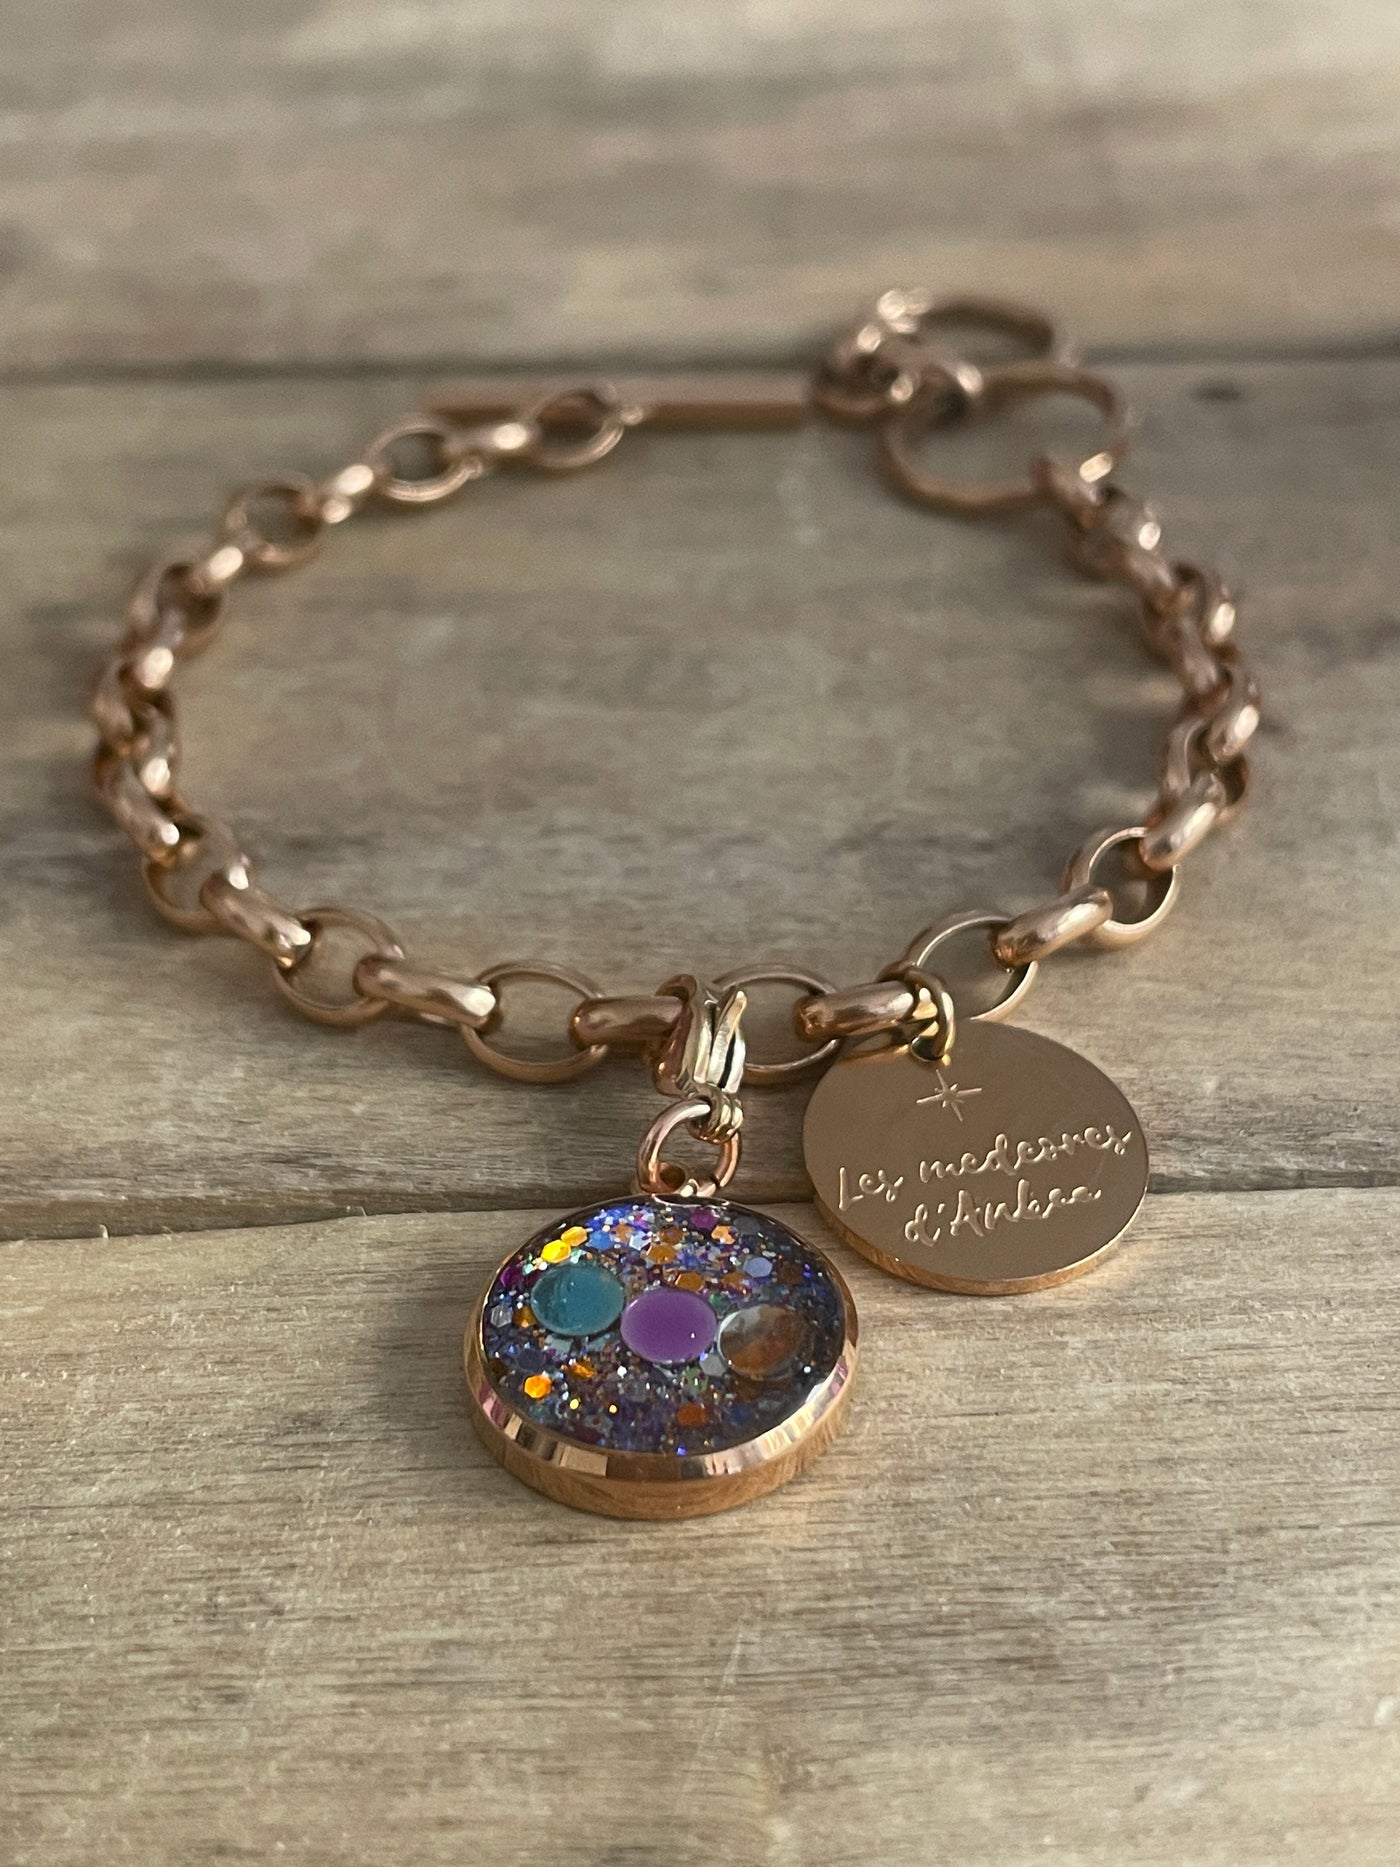 Medeore rose gold Om charm (charm sold alone)